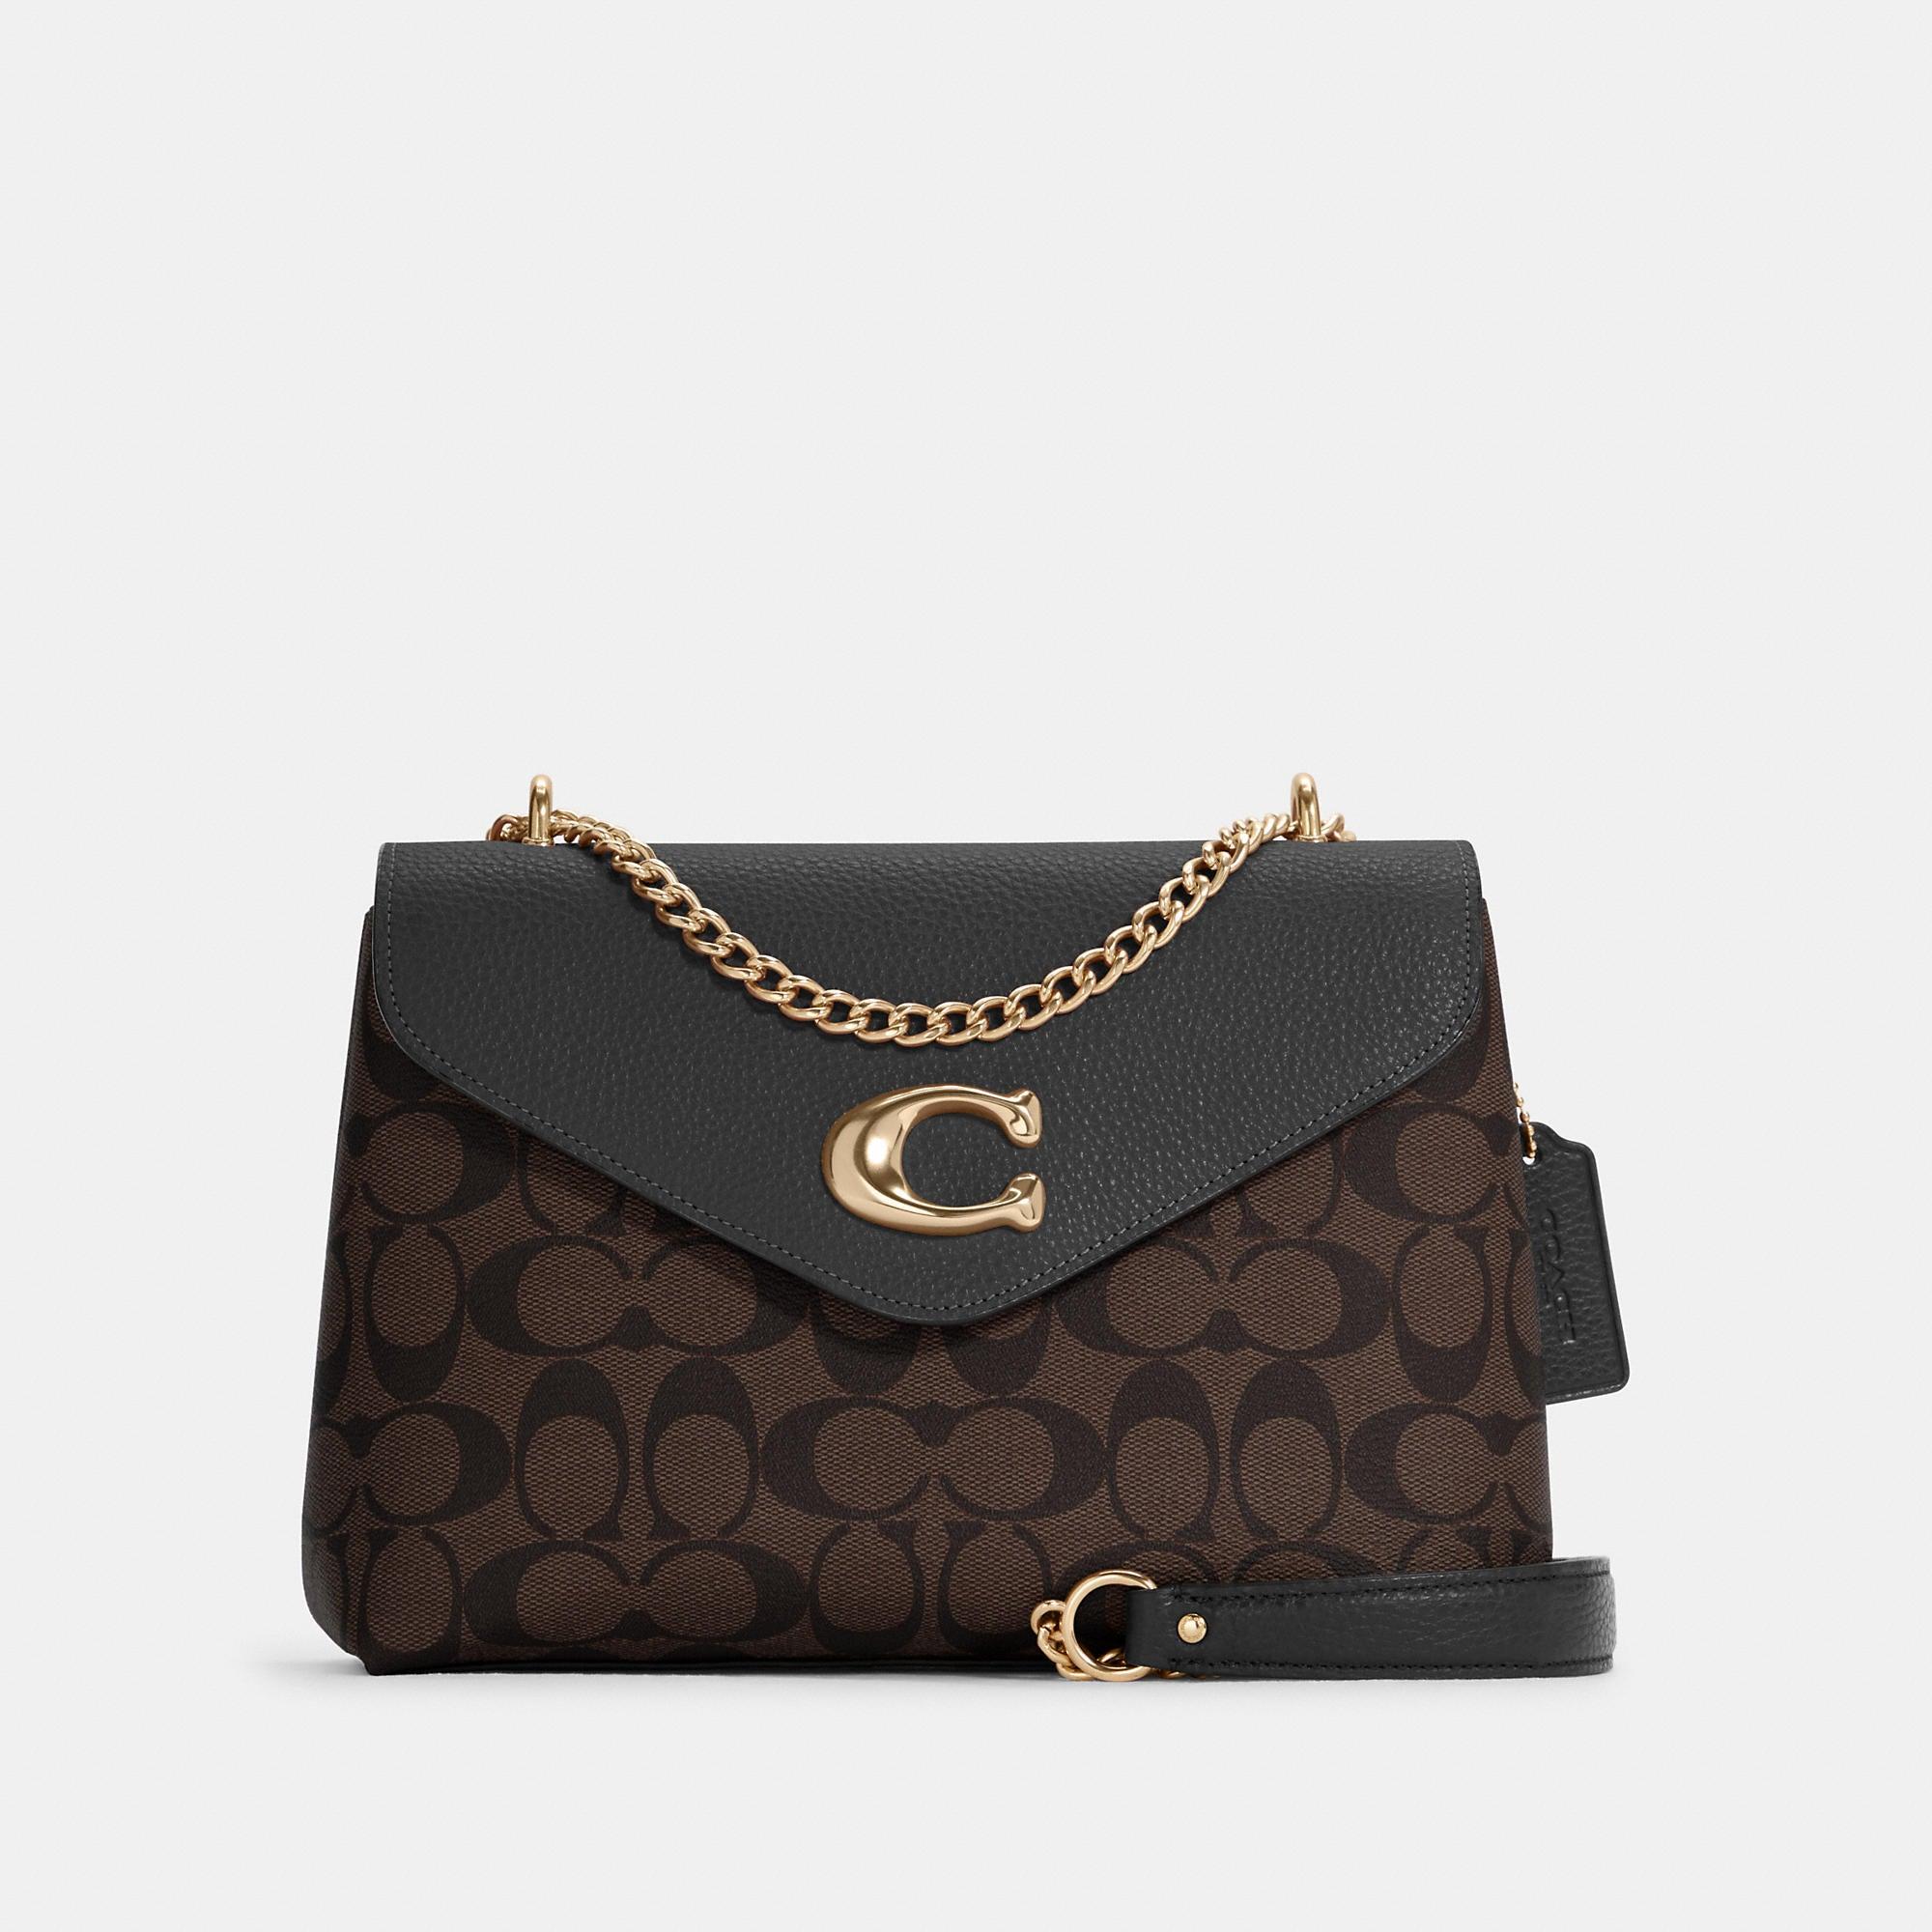 Coach Outlet Tammie Shoulder Bag In Signature Canvas in Black